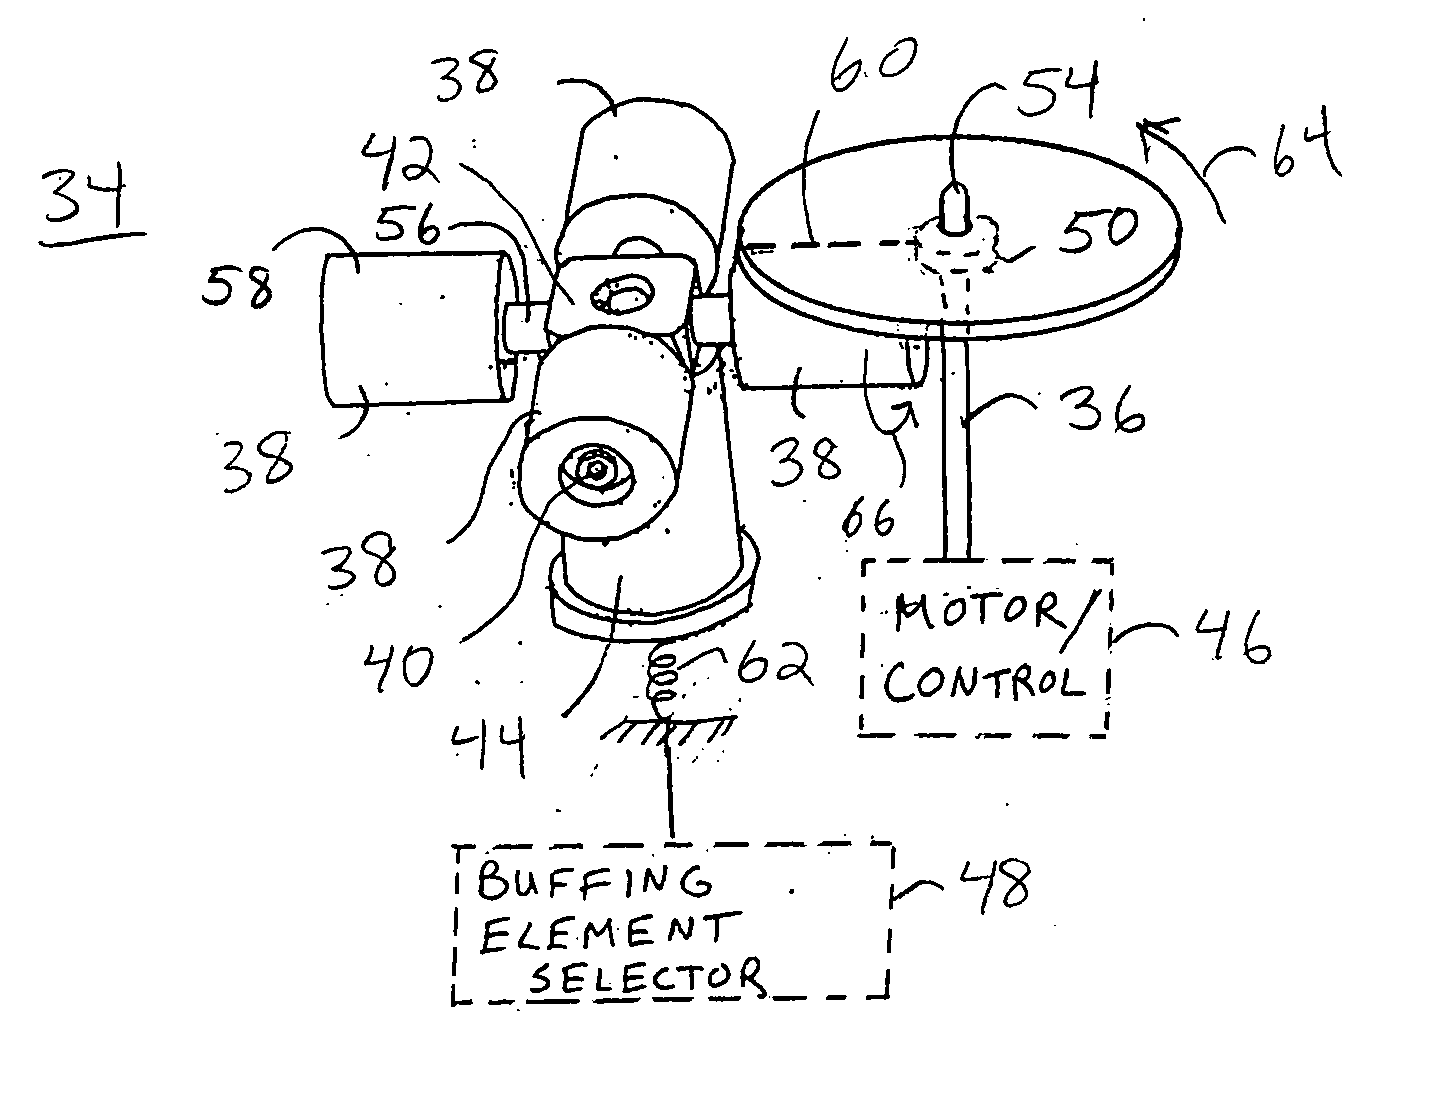 Buffing head and method for reconditioning an optical disc